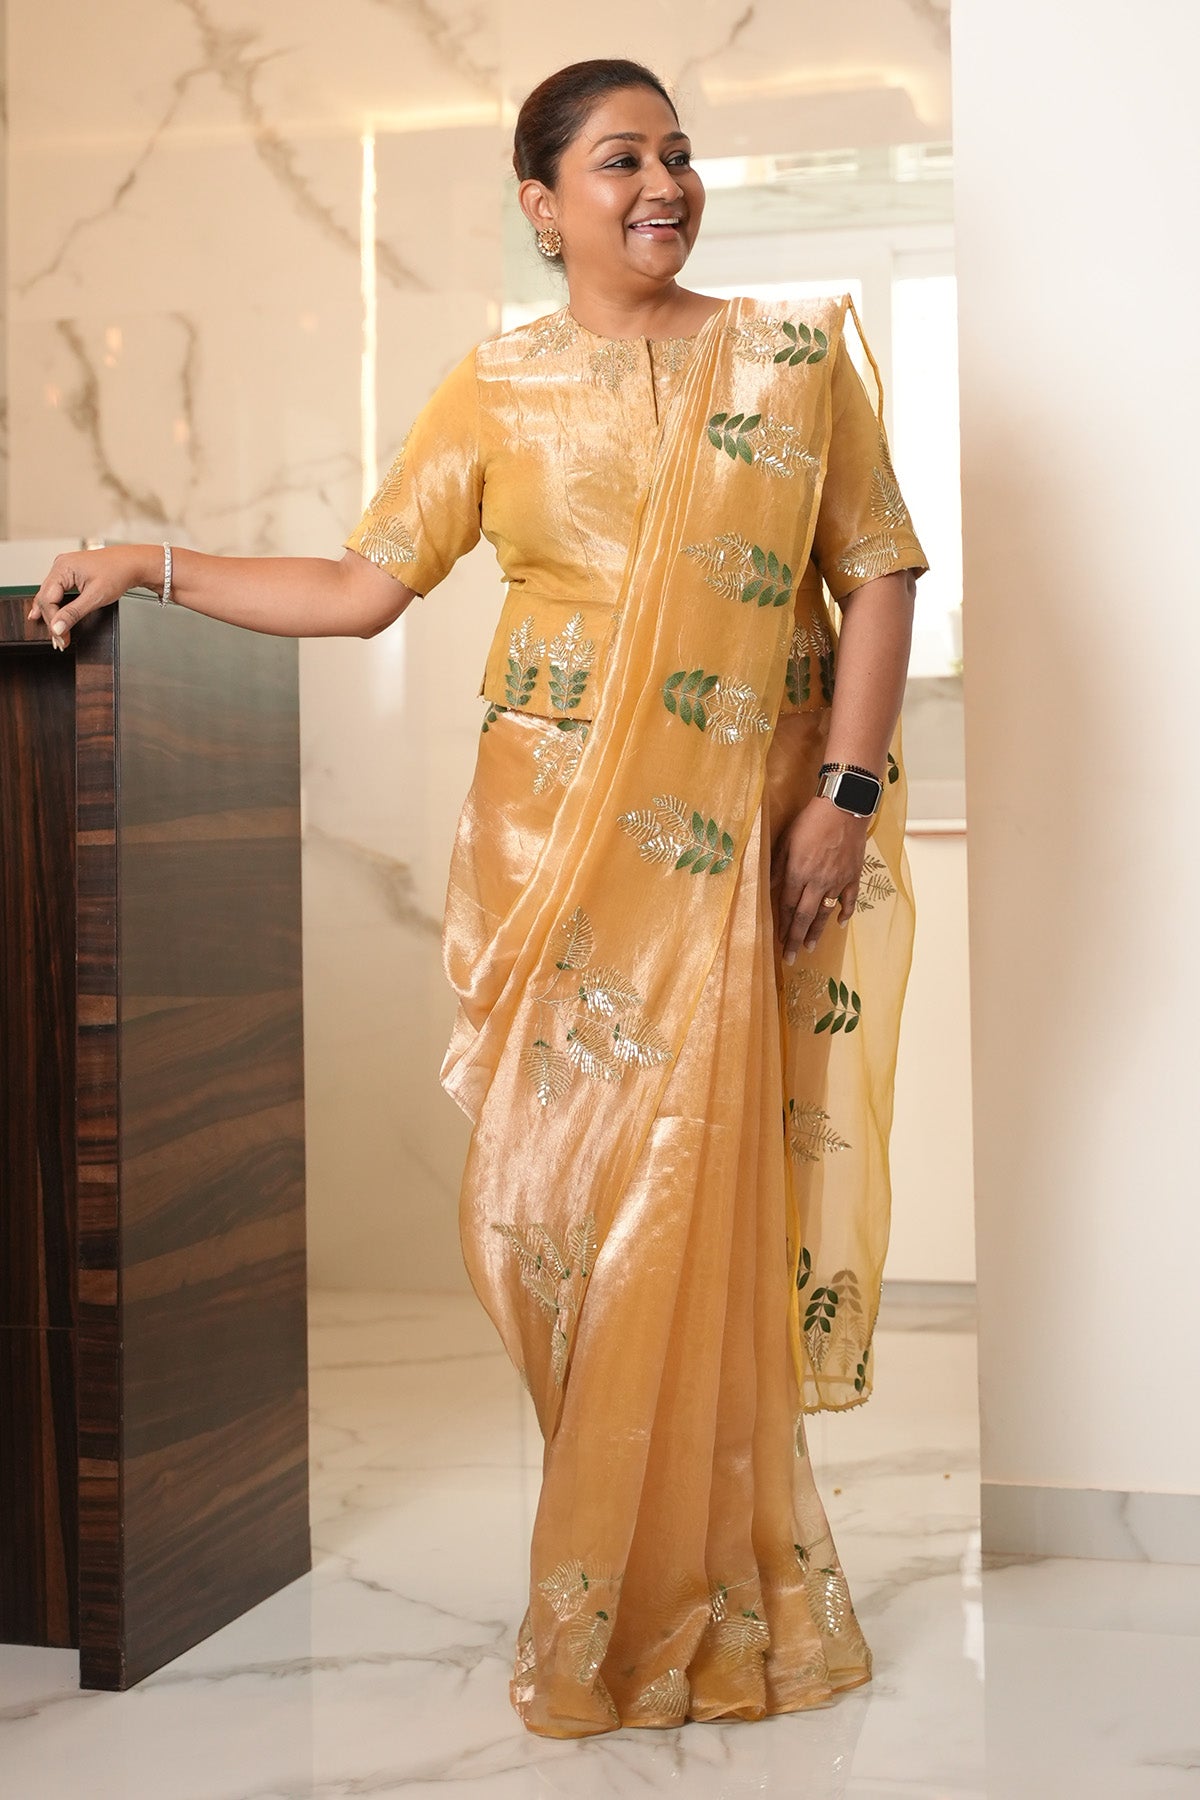 Dolly Jain in Pure Tissue Embroidered Saree and Blouse